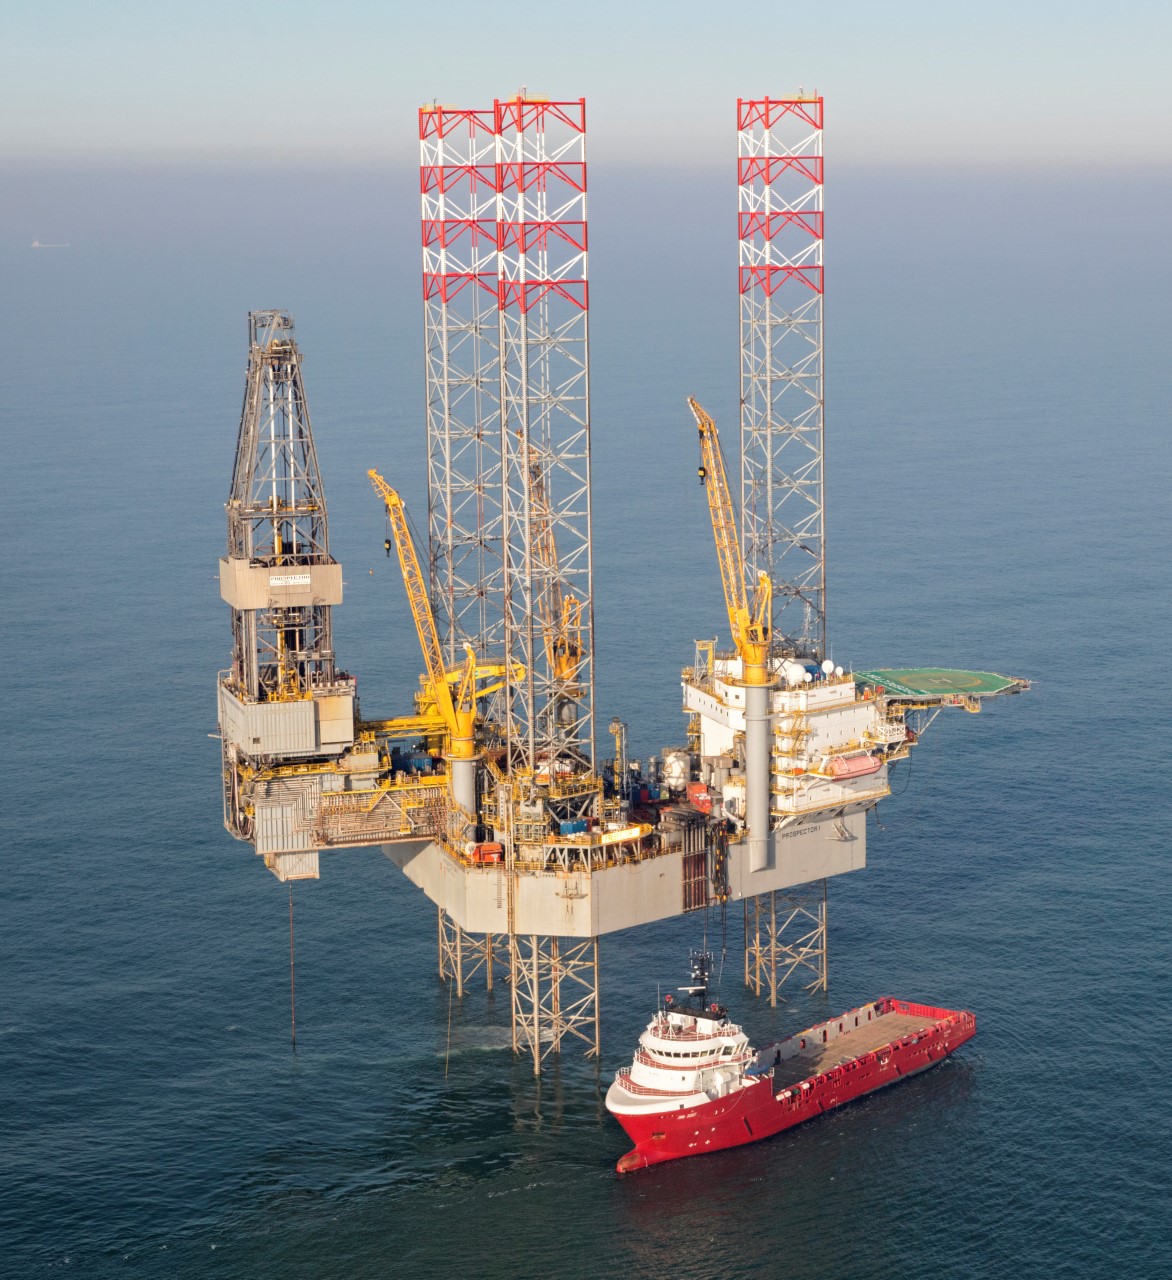 Borr Drilling earns over $158 million from three jack-up rig